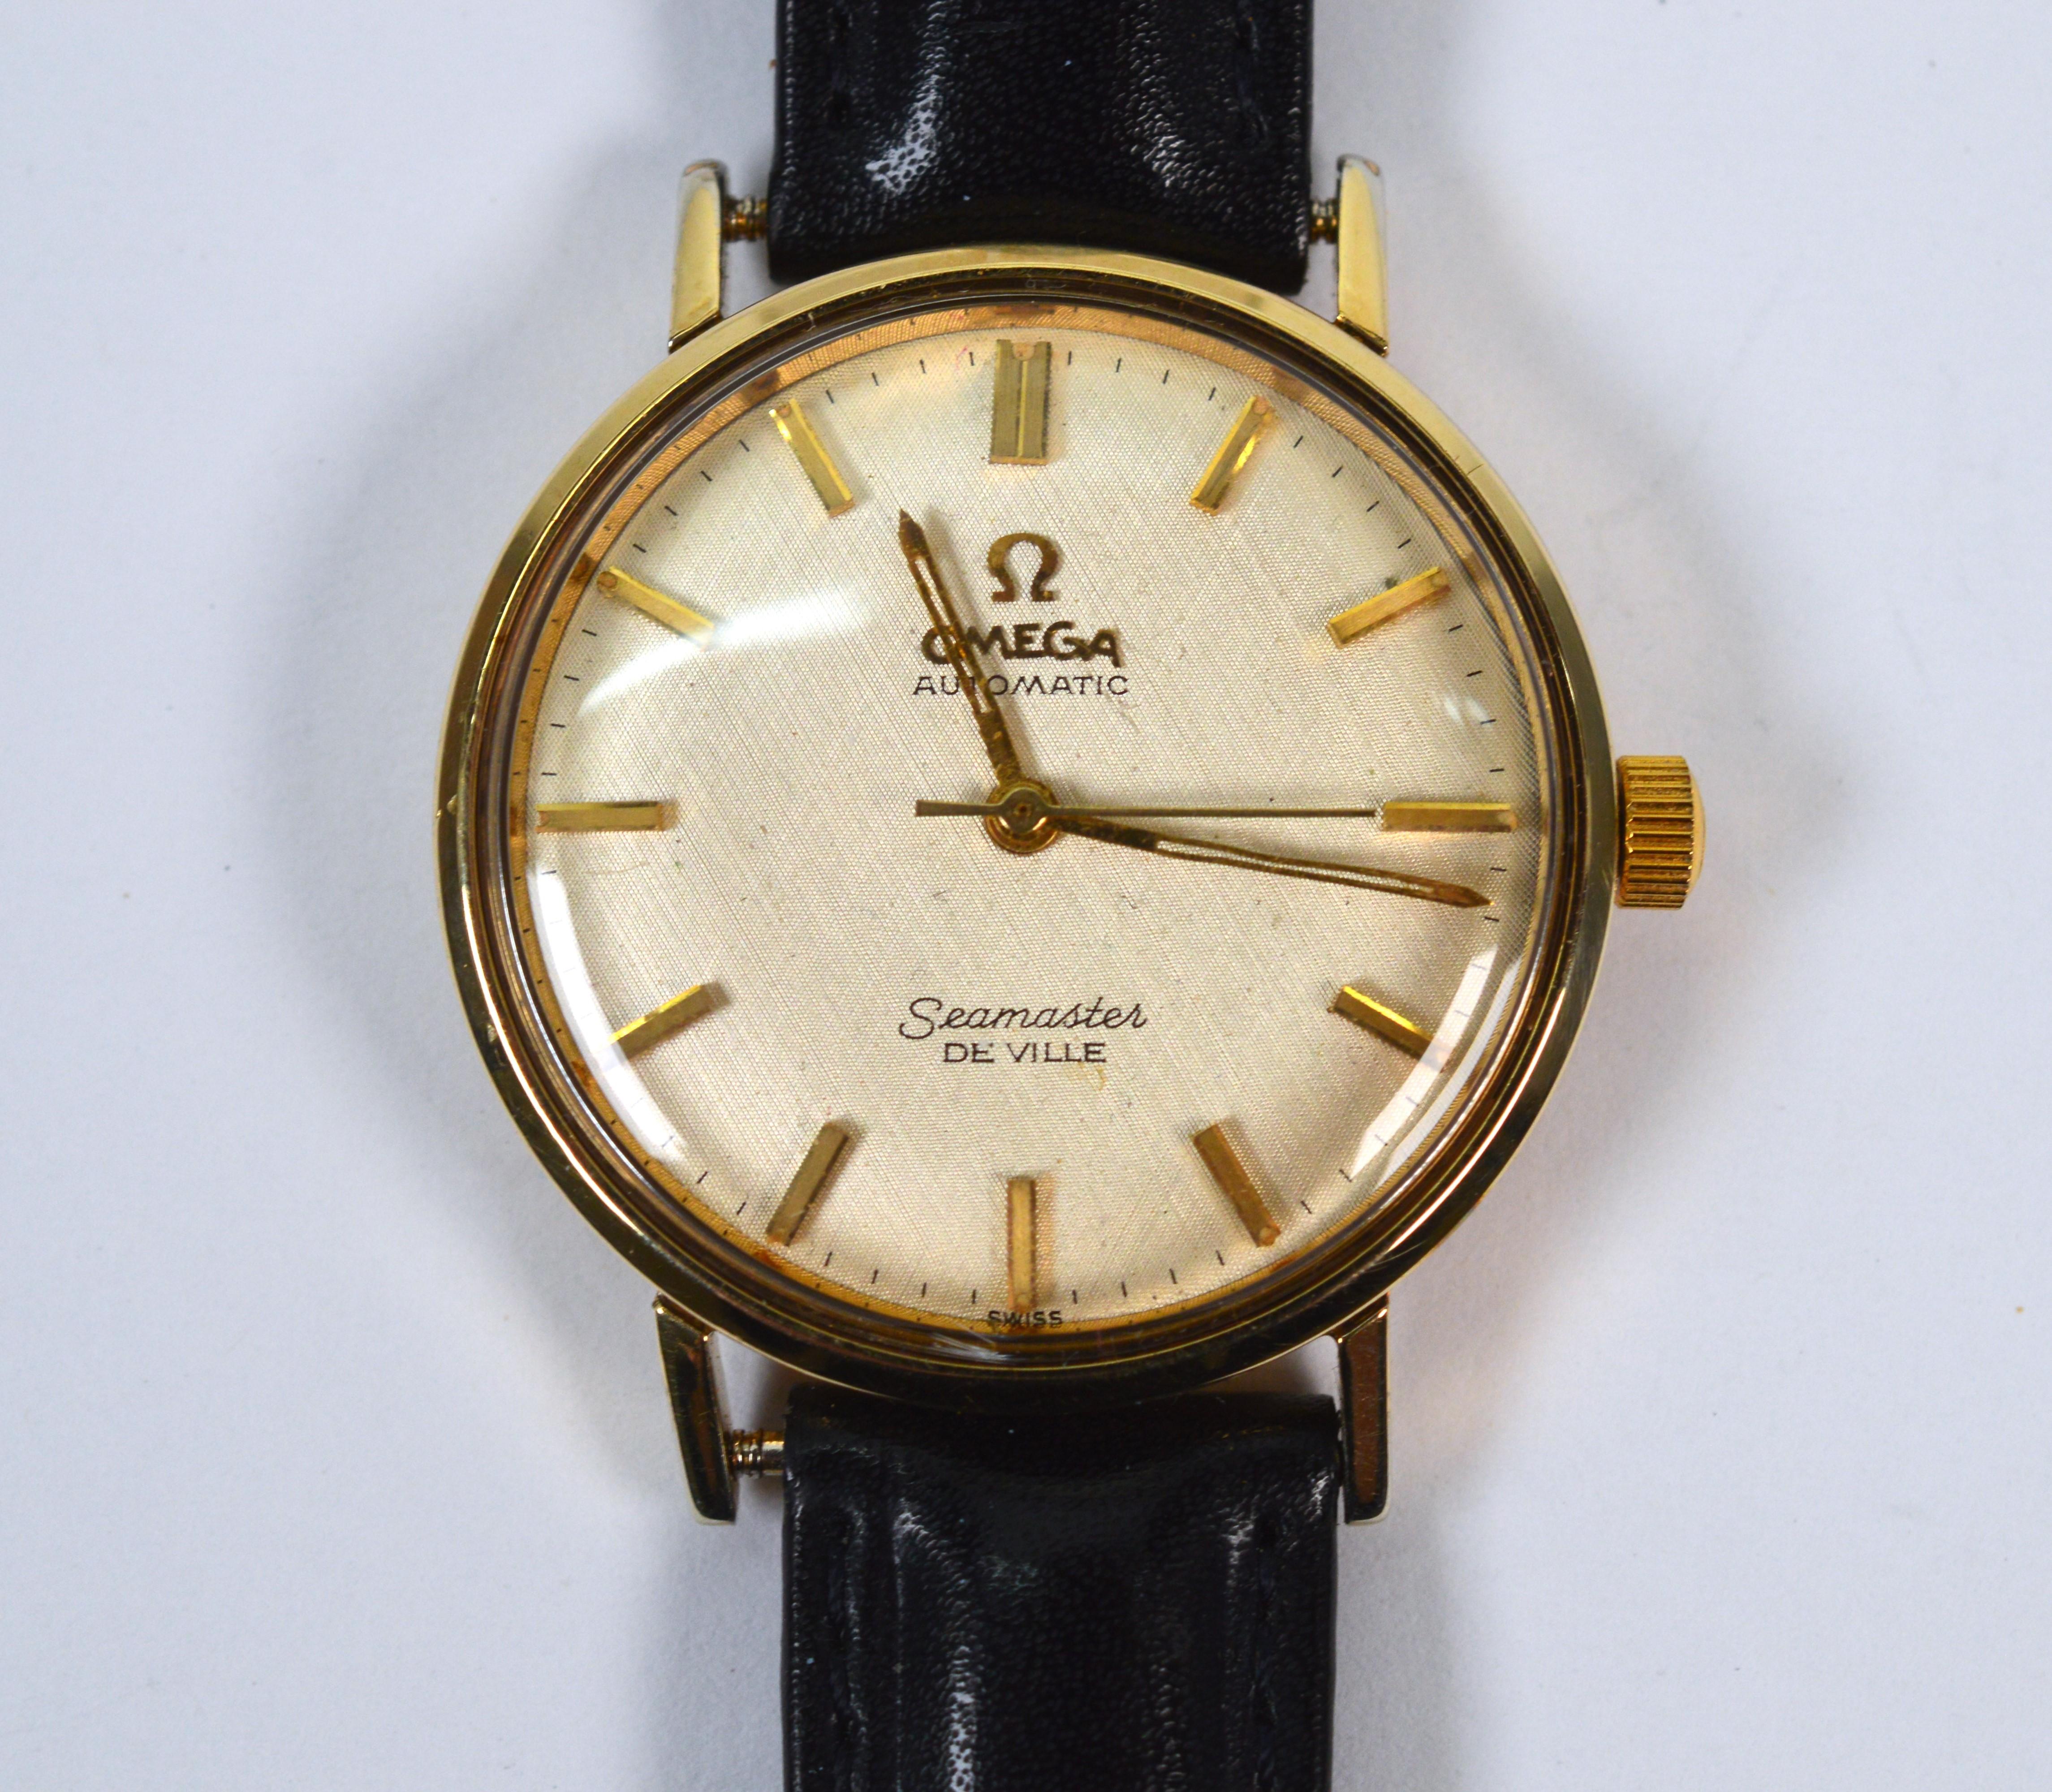 Always in style, a retro classic Omega Seamaster 563 De Ville Gold Filled Men's Wrist Watch. The height of popularity 1950-60s, this sleek 34mm timepiece presents clean lines and is light weight and comfortable to wear. The gold-filled round case